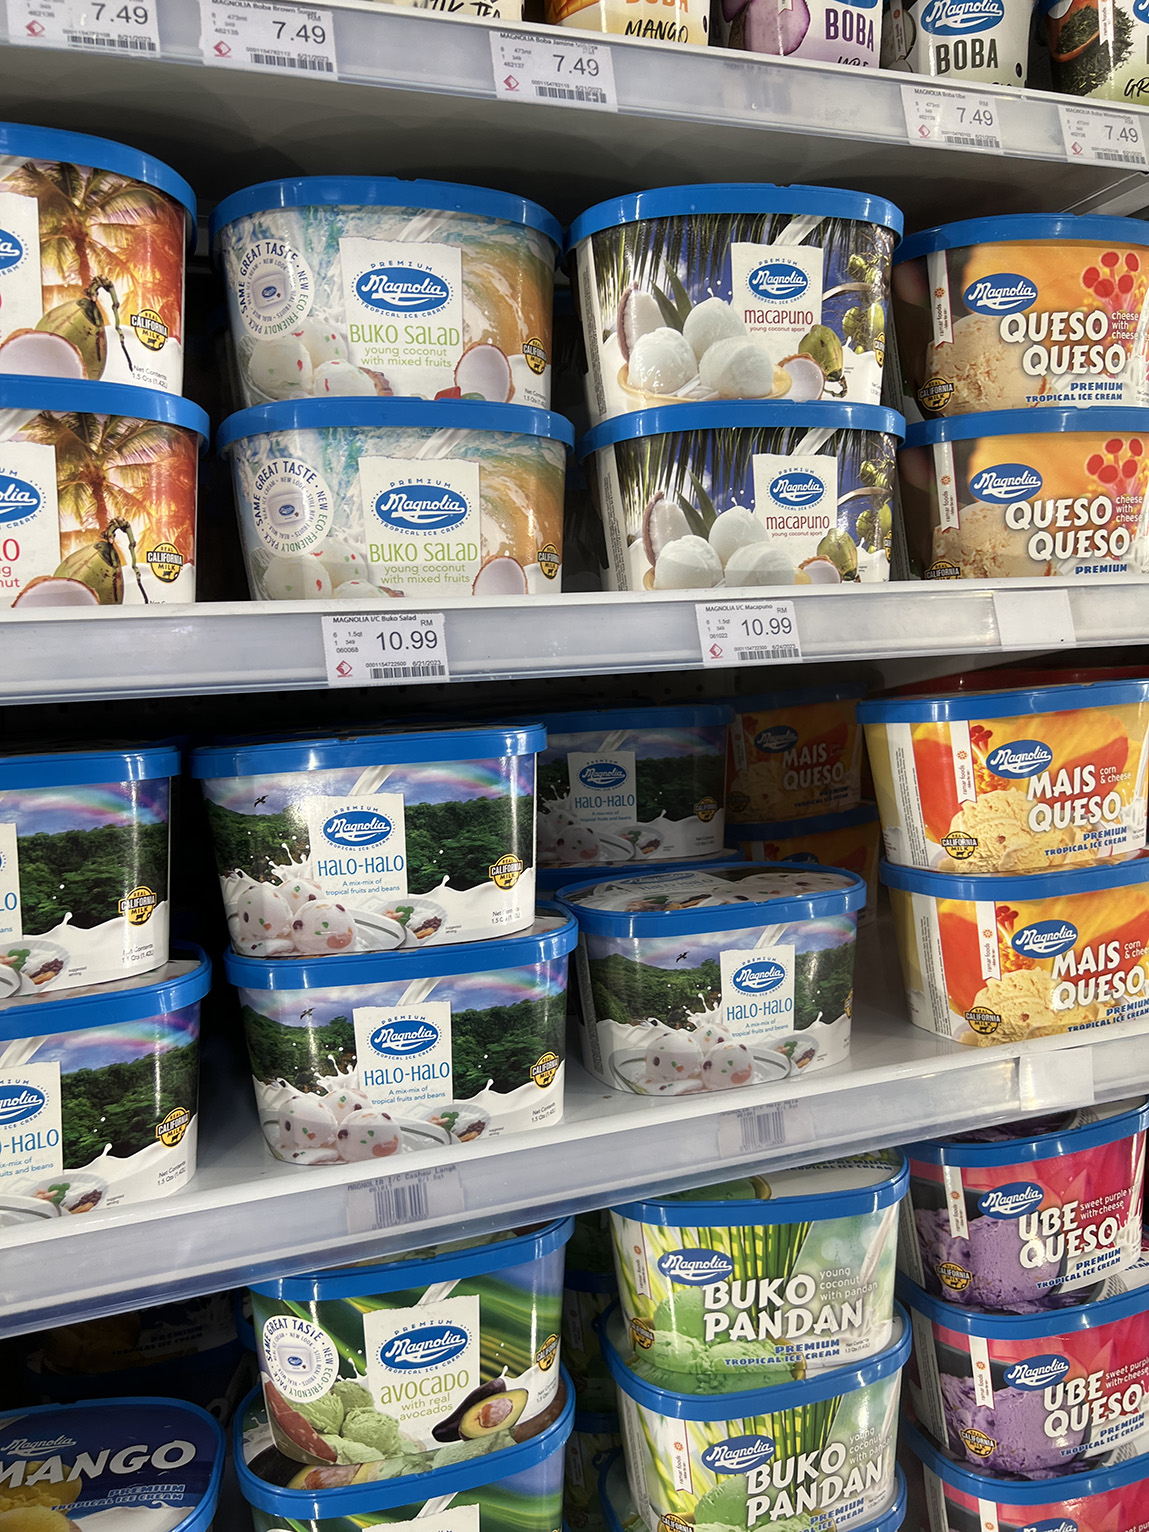 Ice cream - Seafood City Supermarket in Irvine, California - Photo by Julie Nguyen